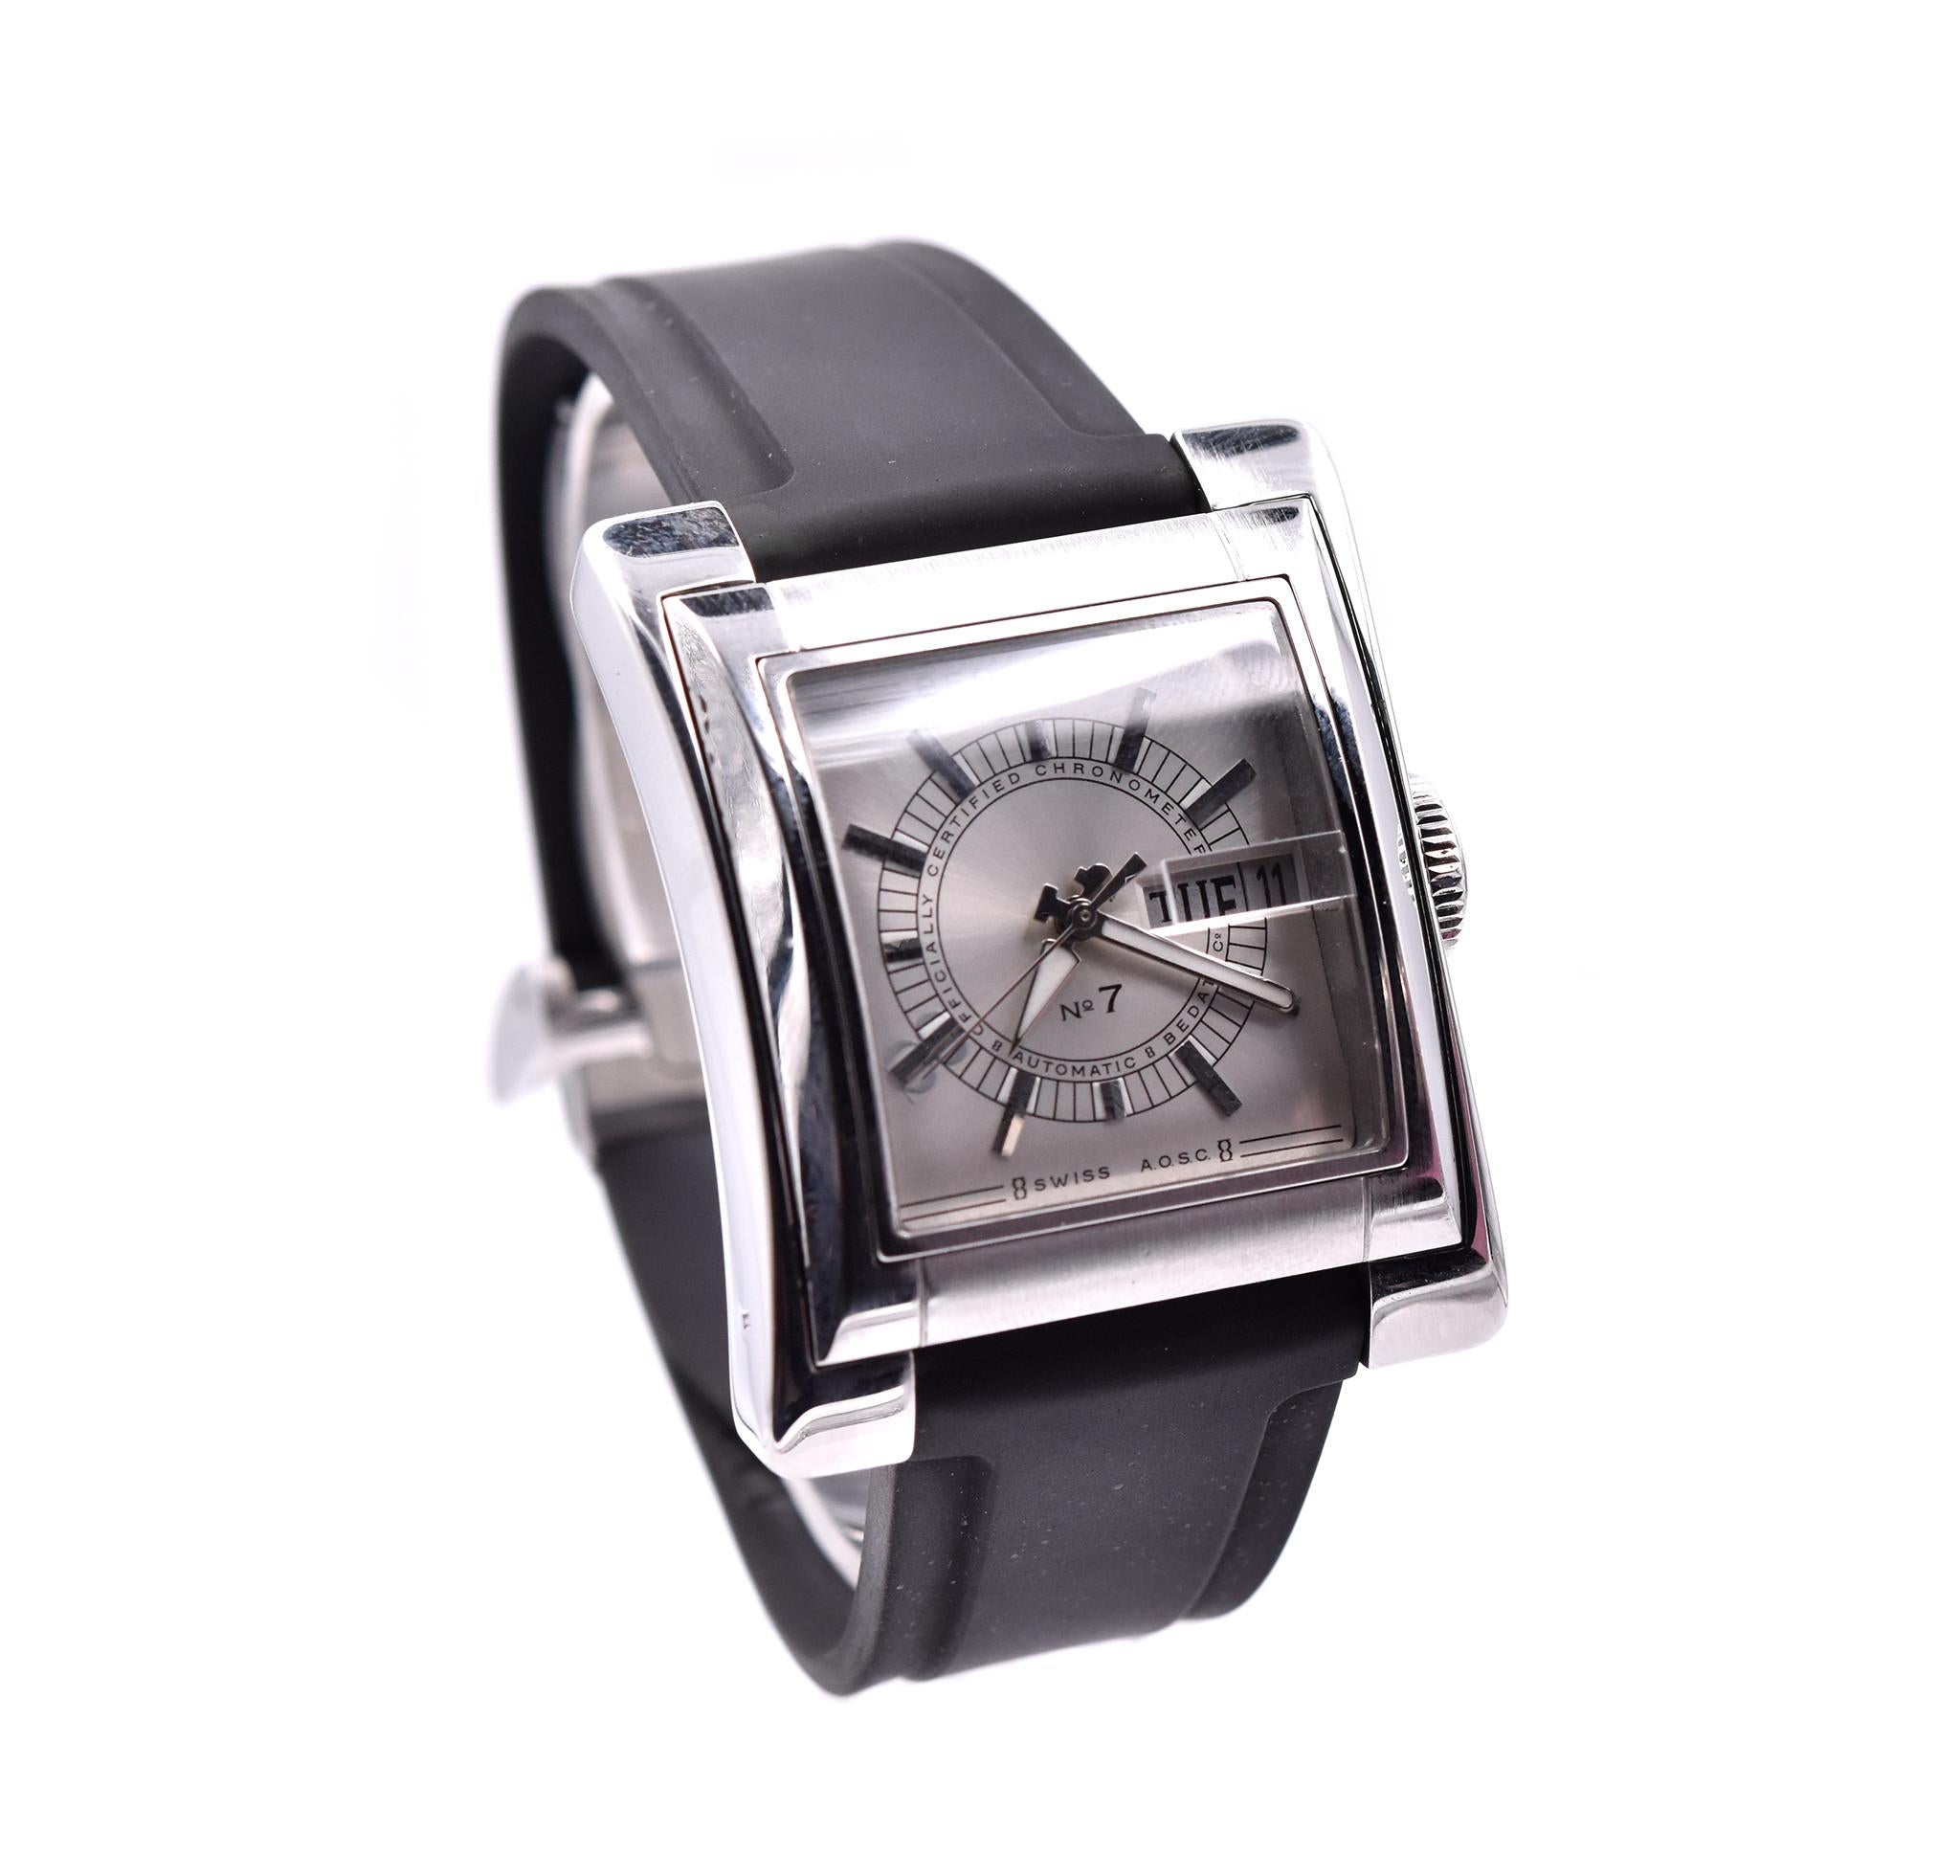 Movement: automatic
Function: hours, minuets, seconds, date, day
Case: 48 X 39mm rectangular stainless steel case, sapphire crystal
Bracelet: black rubber strap, integrated clasp 
Dial: silver dial
Reference #: 797
Serial # 0XXX

No box and